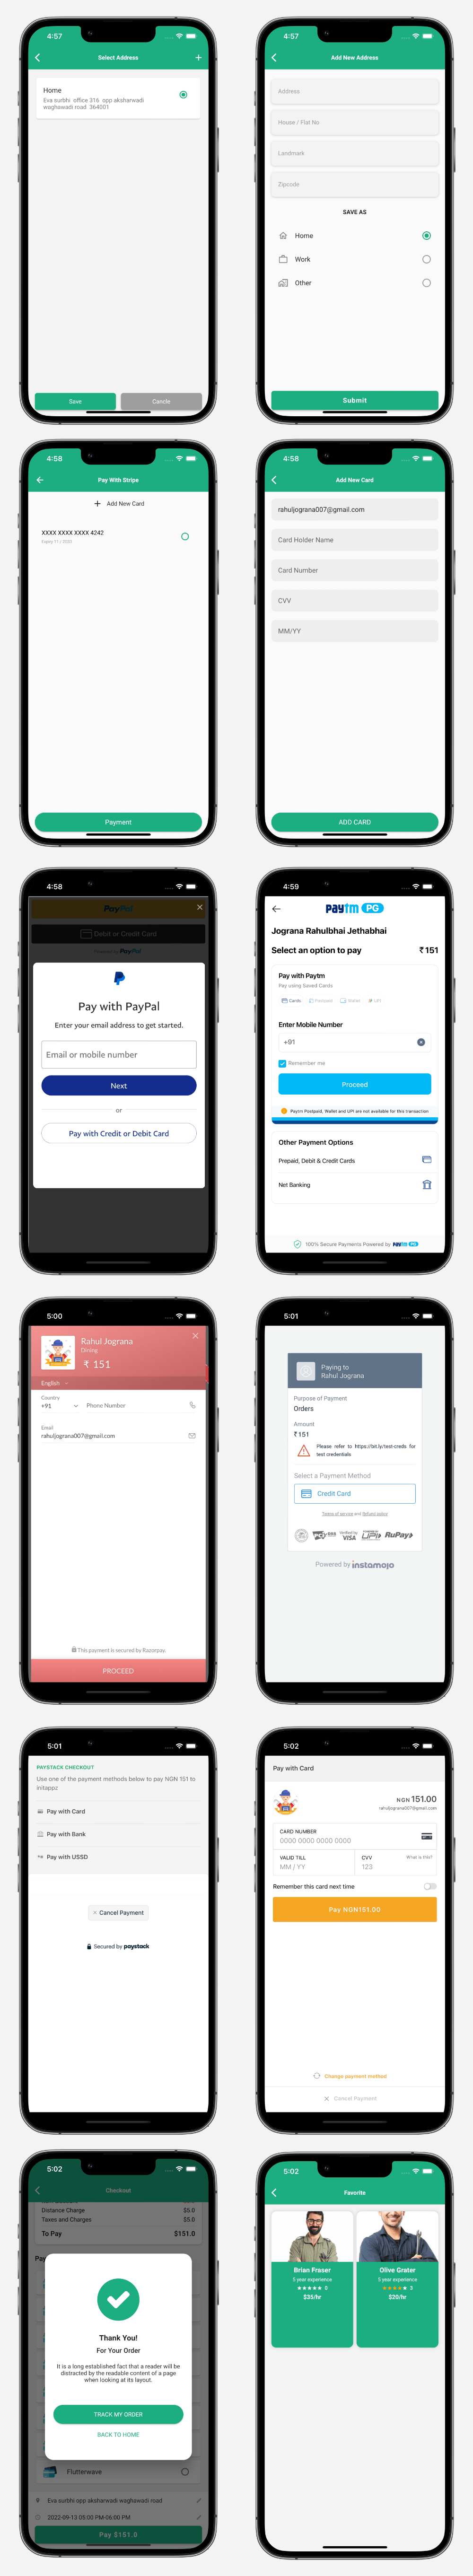 Flutter Handy service - On-Demand Home Services & Shopping Android+iOS+Website Full Solution Laravel - 6